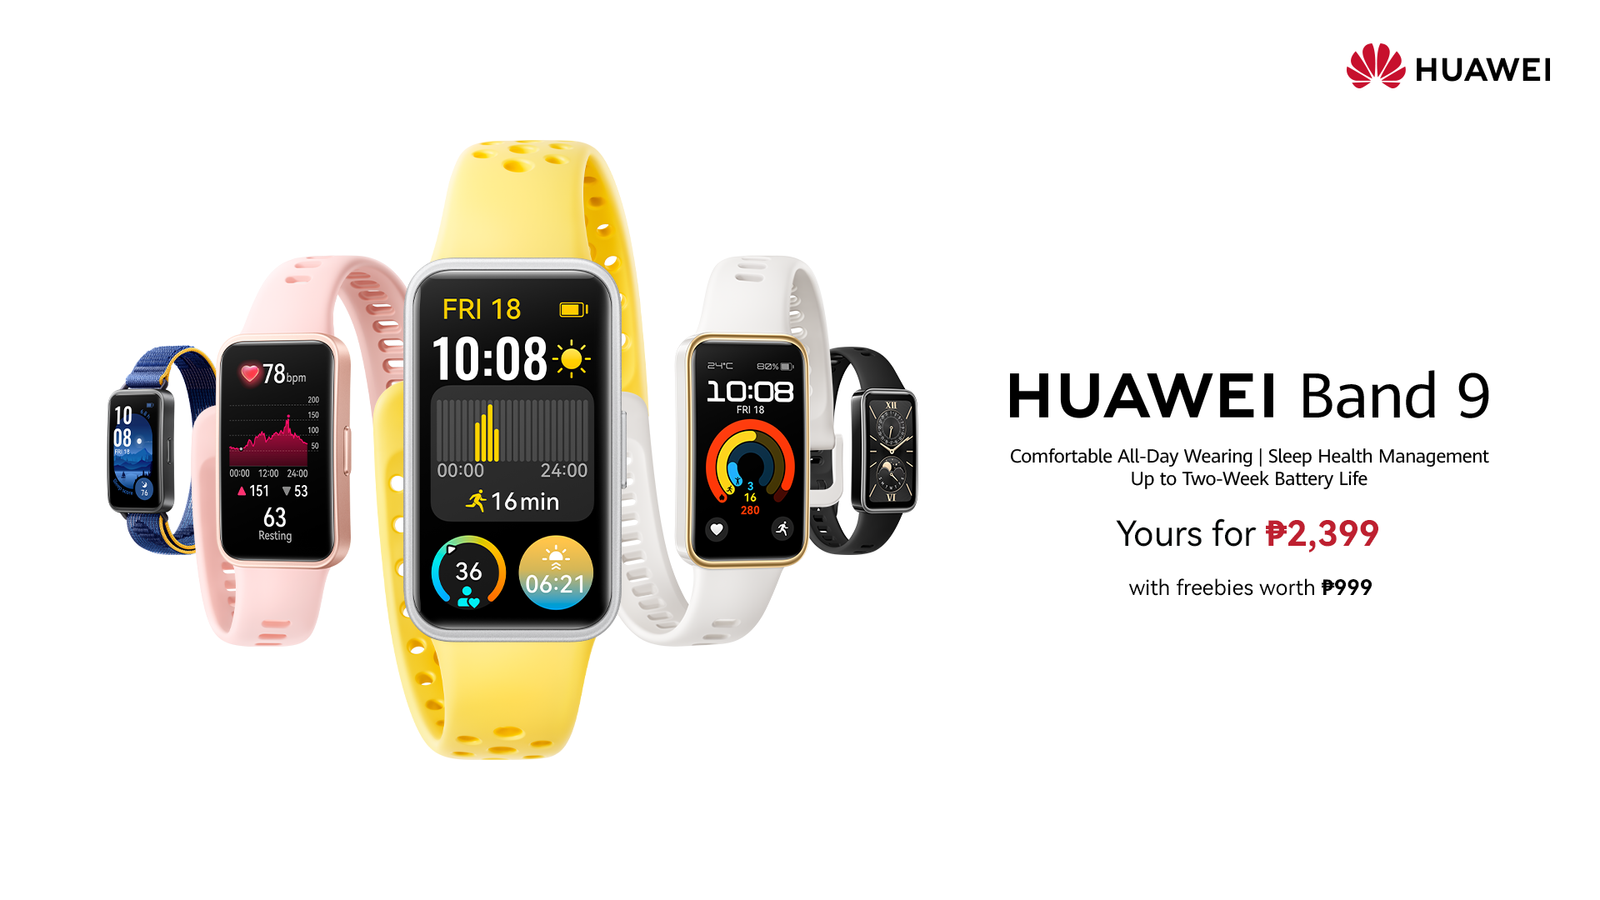 Huawei Band 9 Reshaping All Day Comfort in Smart Watch Wearables